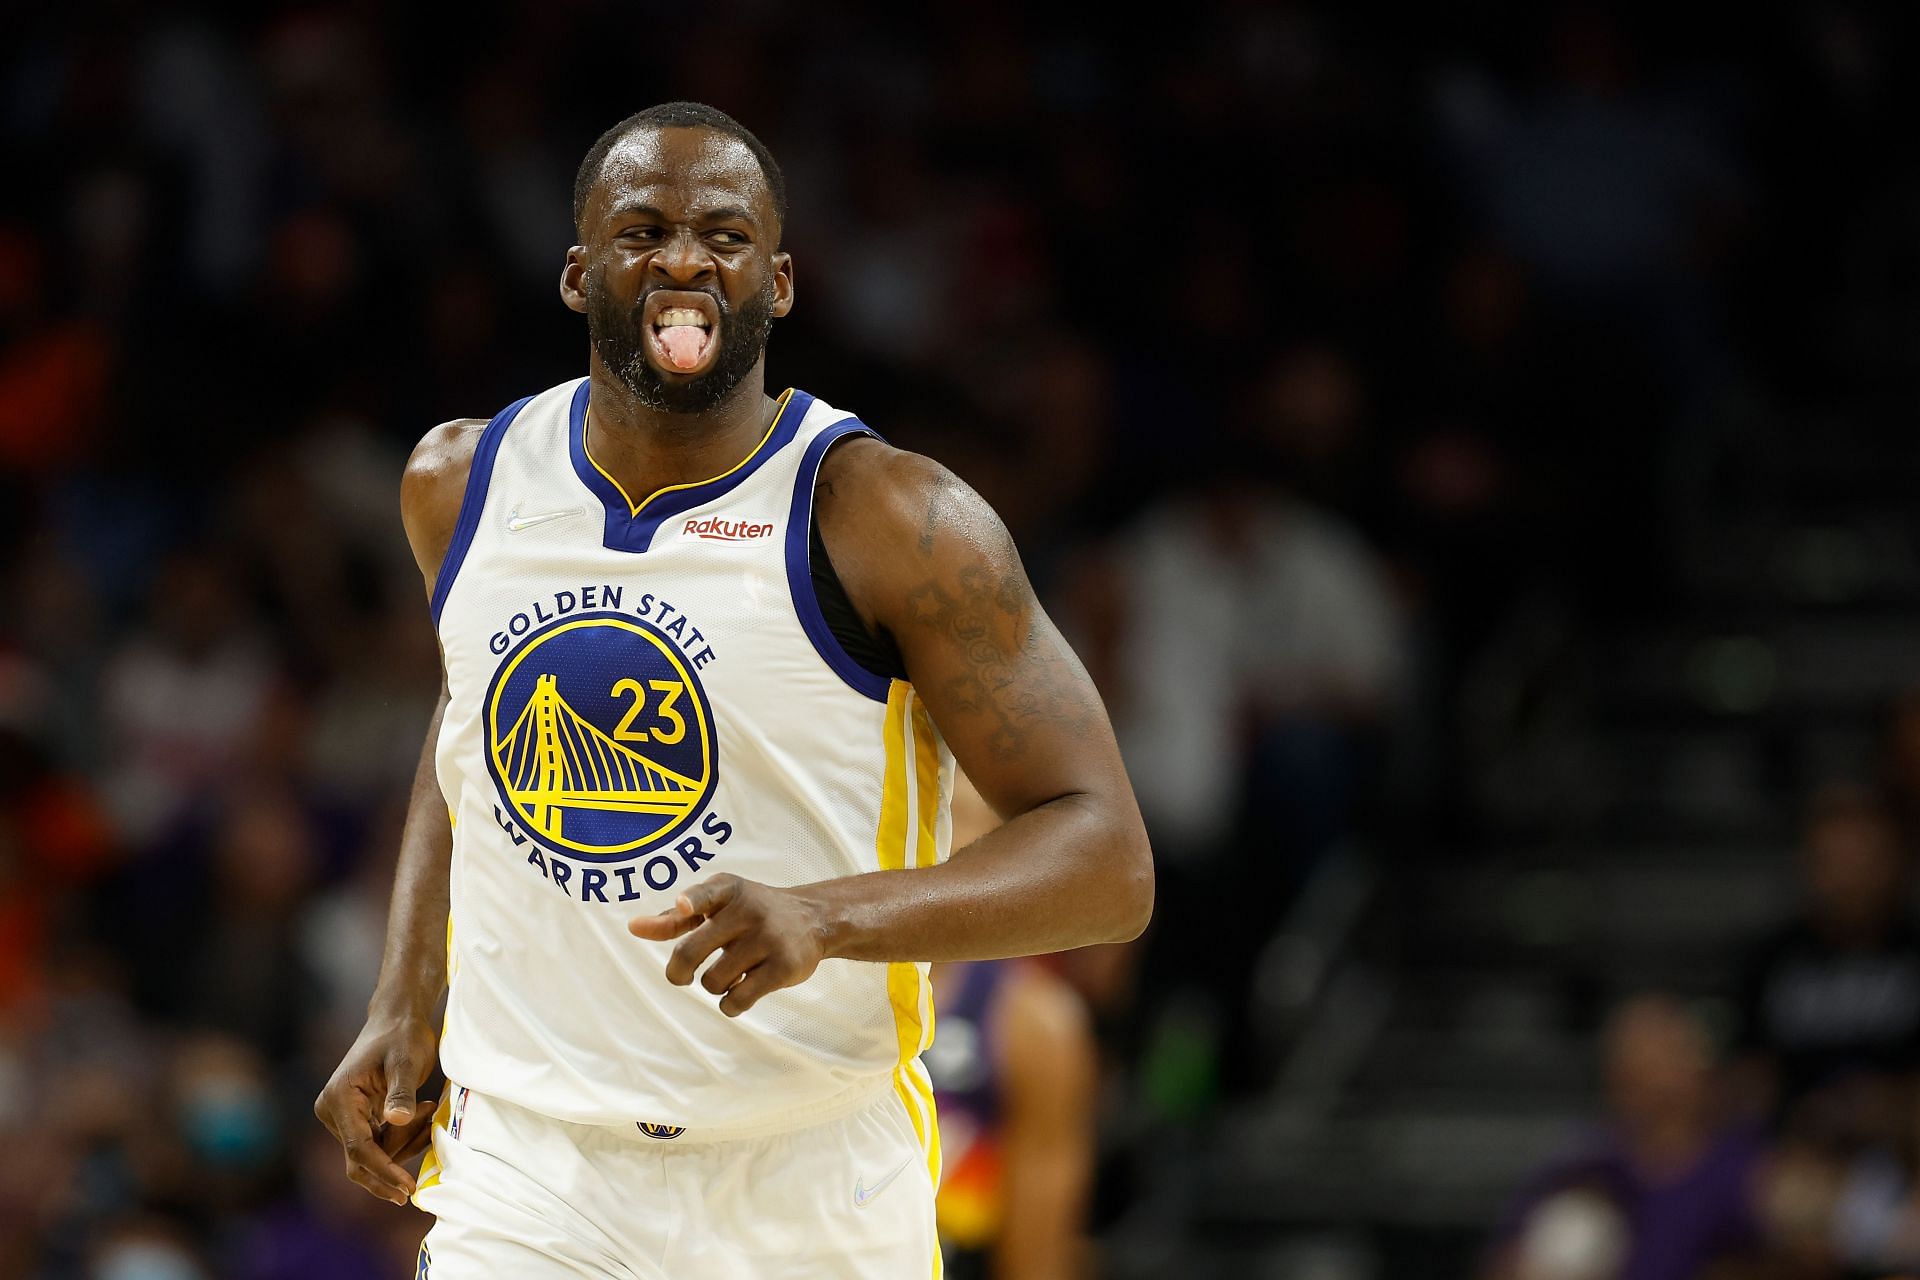 Golden State Warriors forward Draymond Green is a favorite for Defensive Player of the Year.